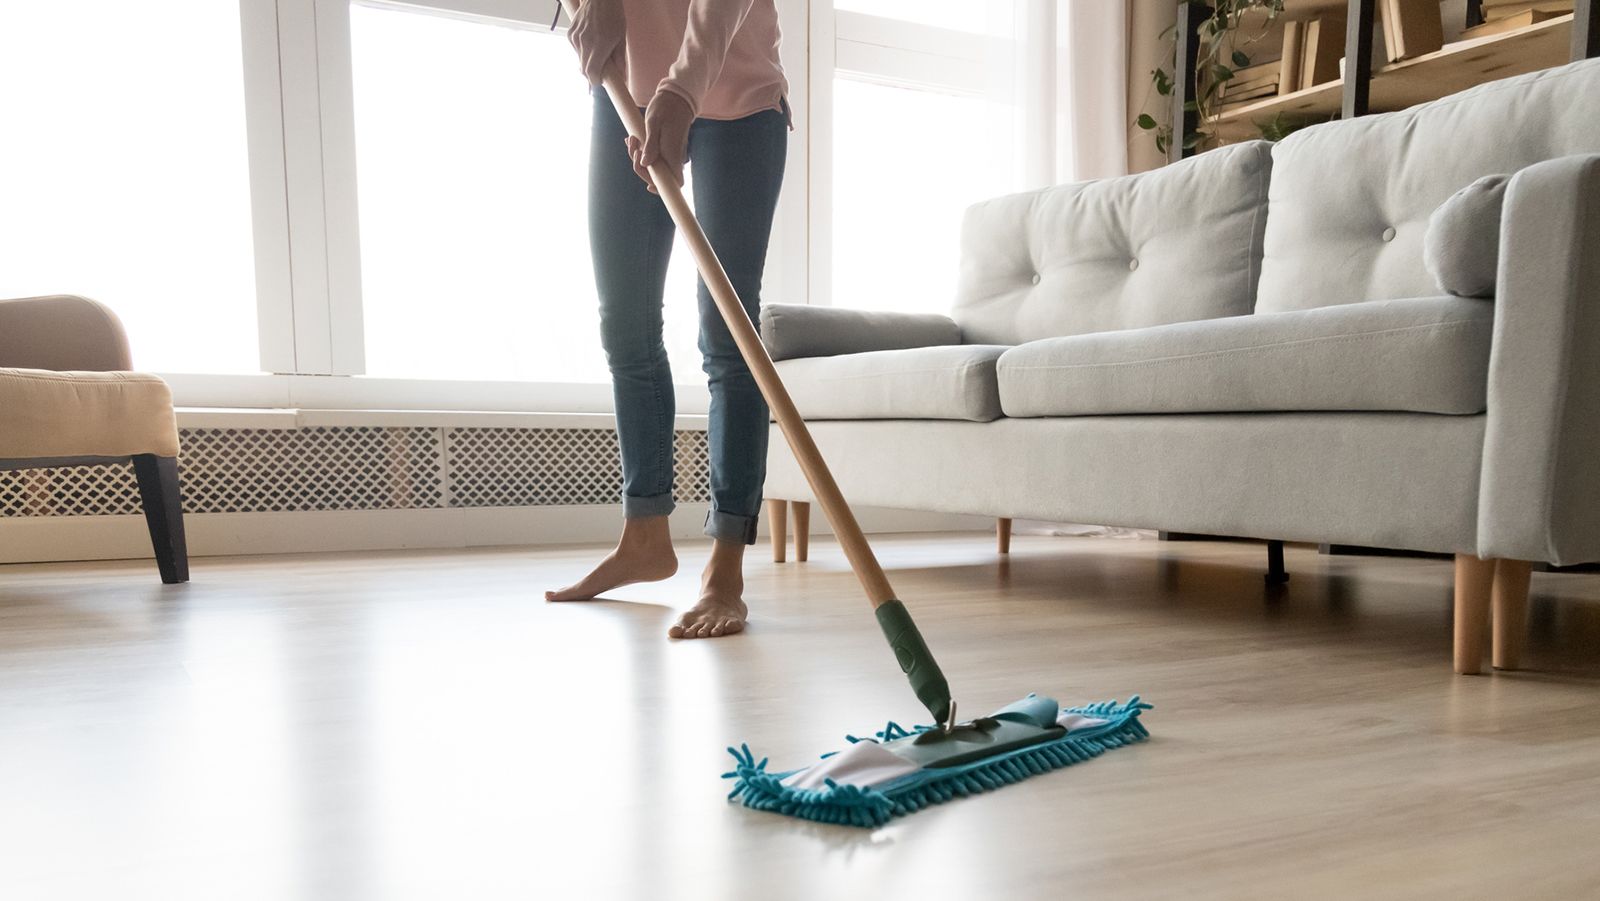 How to clean hardwood and laminate floors correctly, according to experts | CNN Underscored